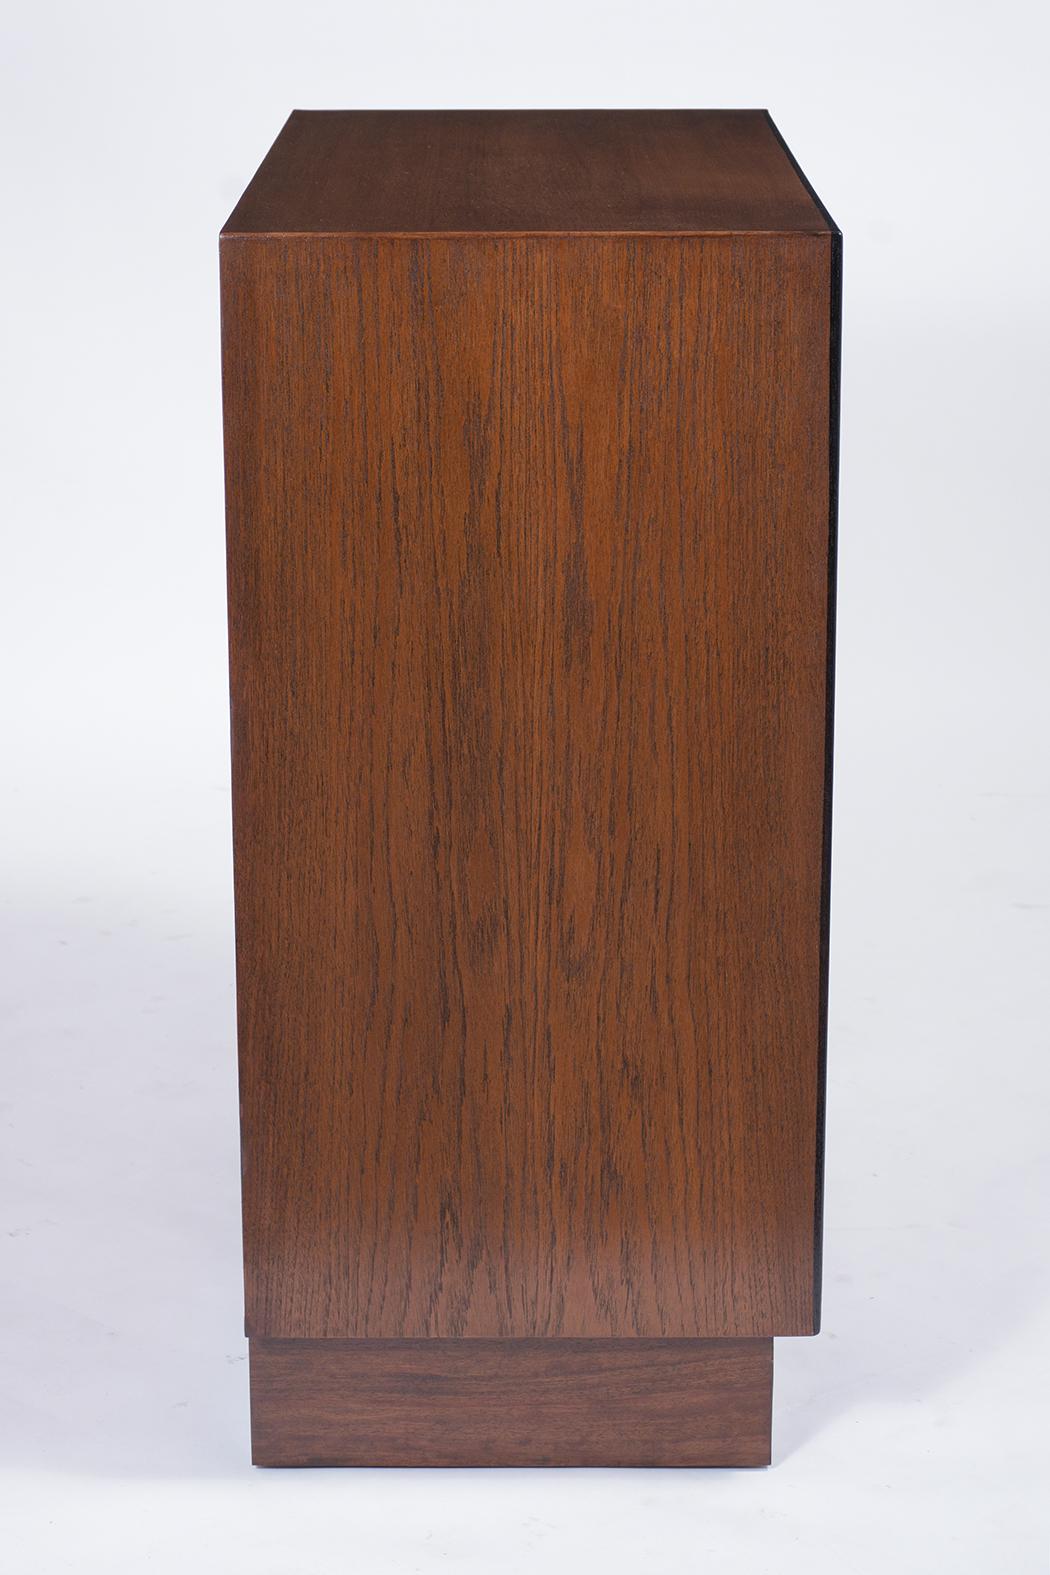 1960s Mid-Century Modern Danish Teak Wood Chest of Drawers with Ebonized Accents For Sale 4